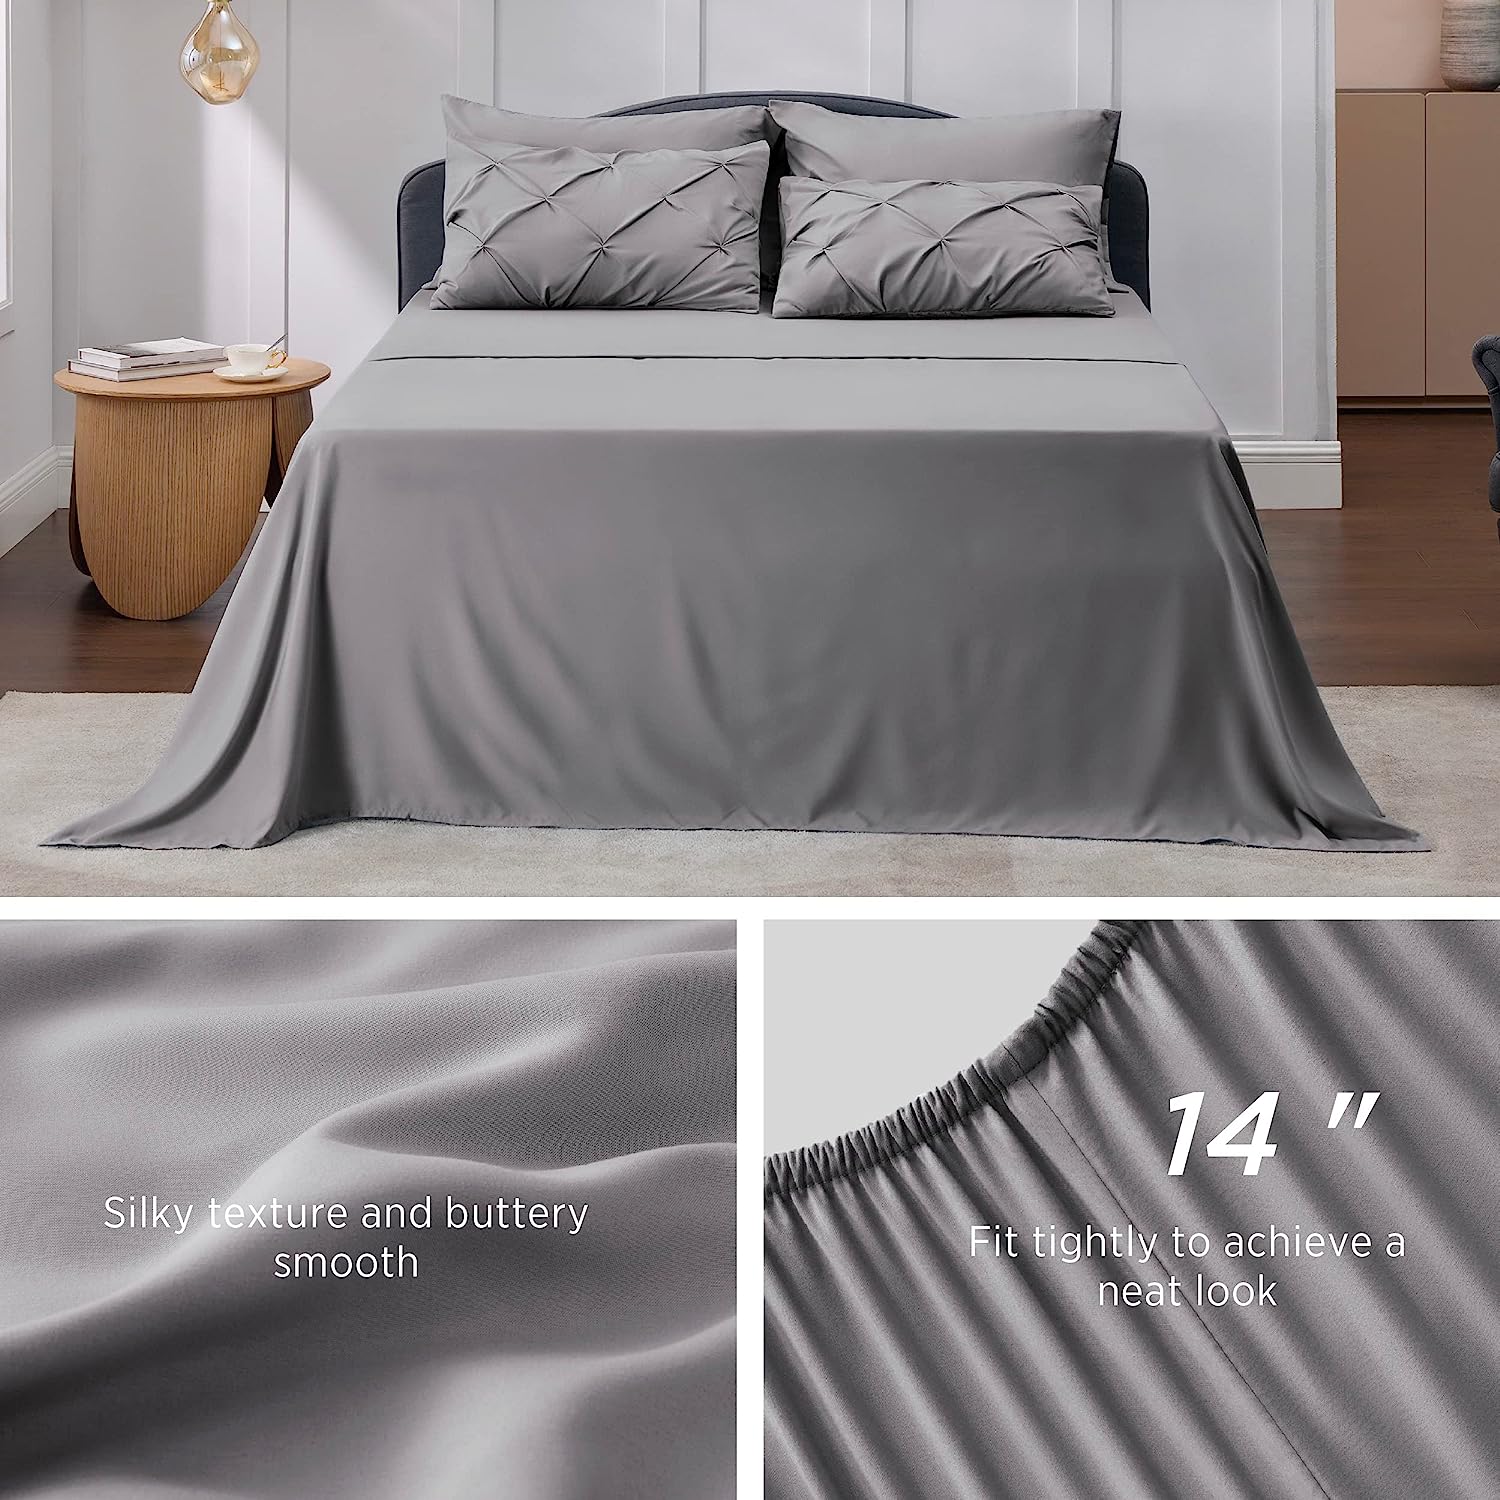 https://bigbigmart.com/wp-content/uploads/2023/09/Bedsure-Queen-Comforter-Set-7-Pieces-Comforters-Queen-Size-Grey-Pintuck-Bedding-Sets-Queen-for-All-Season-Bed-in-a-Bag-with-Flat-Sheet-and-Fitted-Sheet-Pillowcases-Shams4.jpg